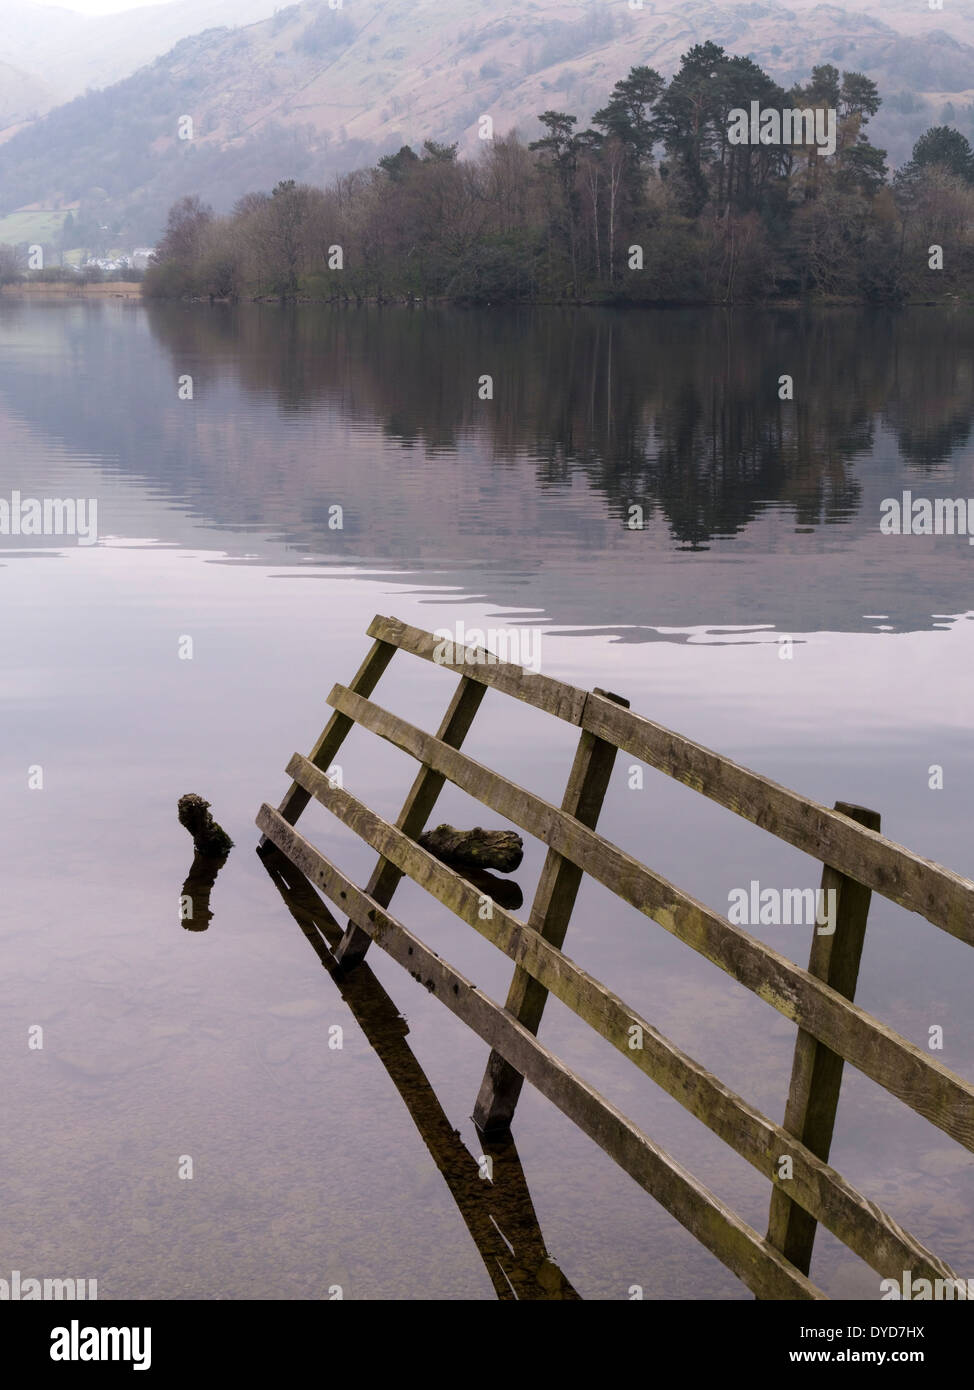 Wooden fence in still waters of Lake Grasmere, English Lake District, Cumbria, England, UK Stock Photo